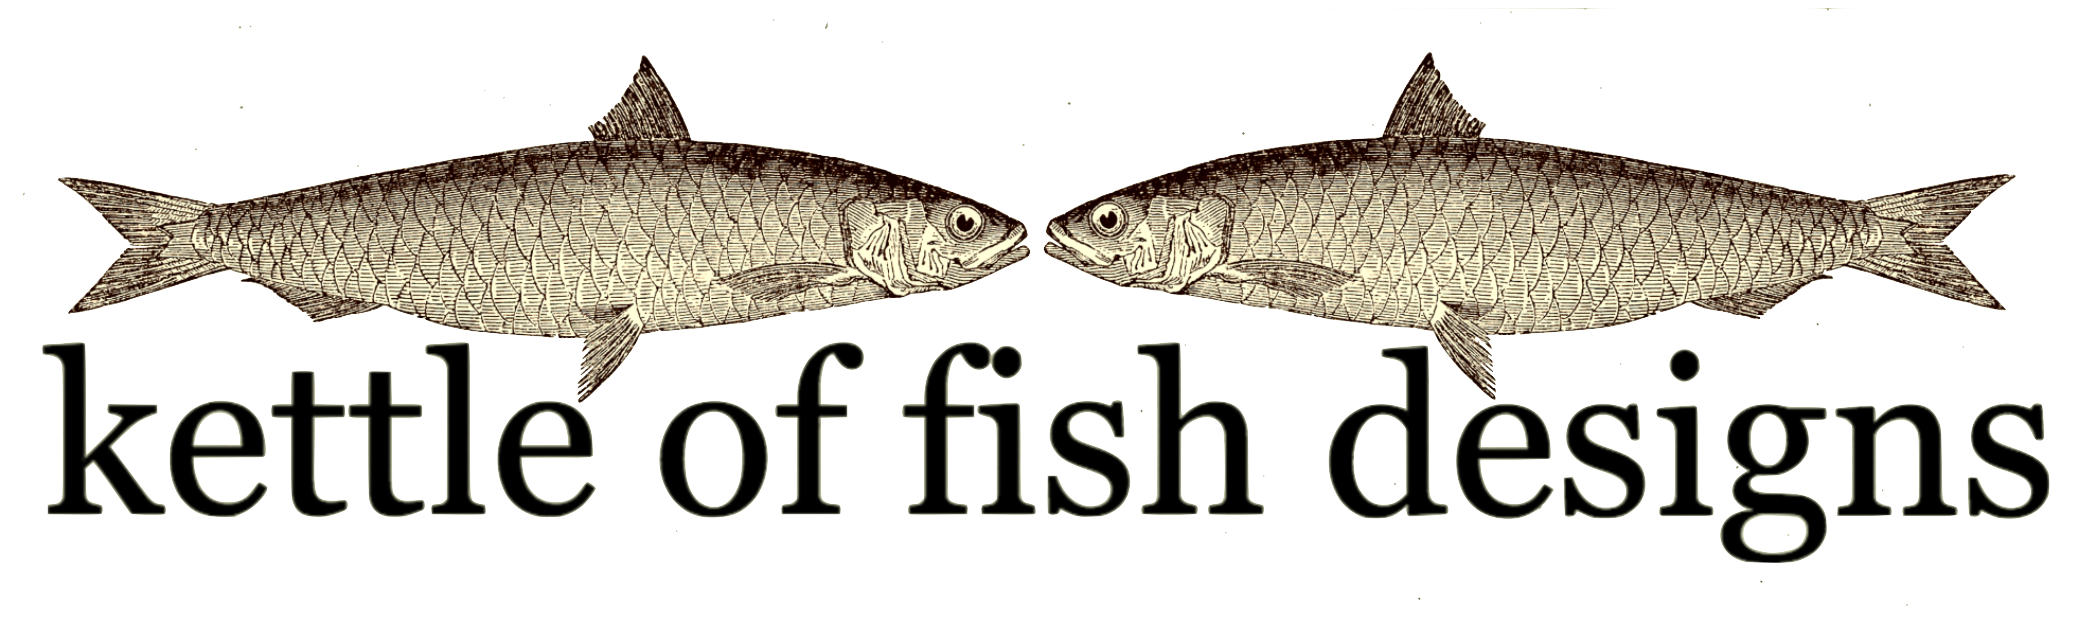 kettle of fish designs